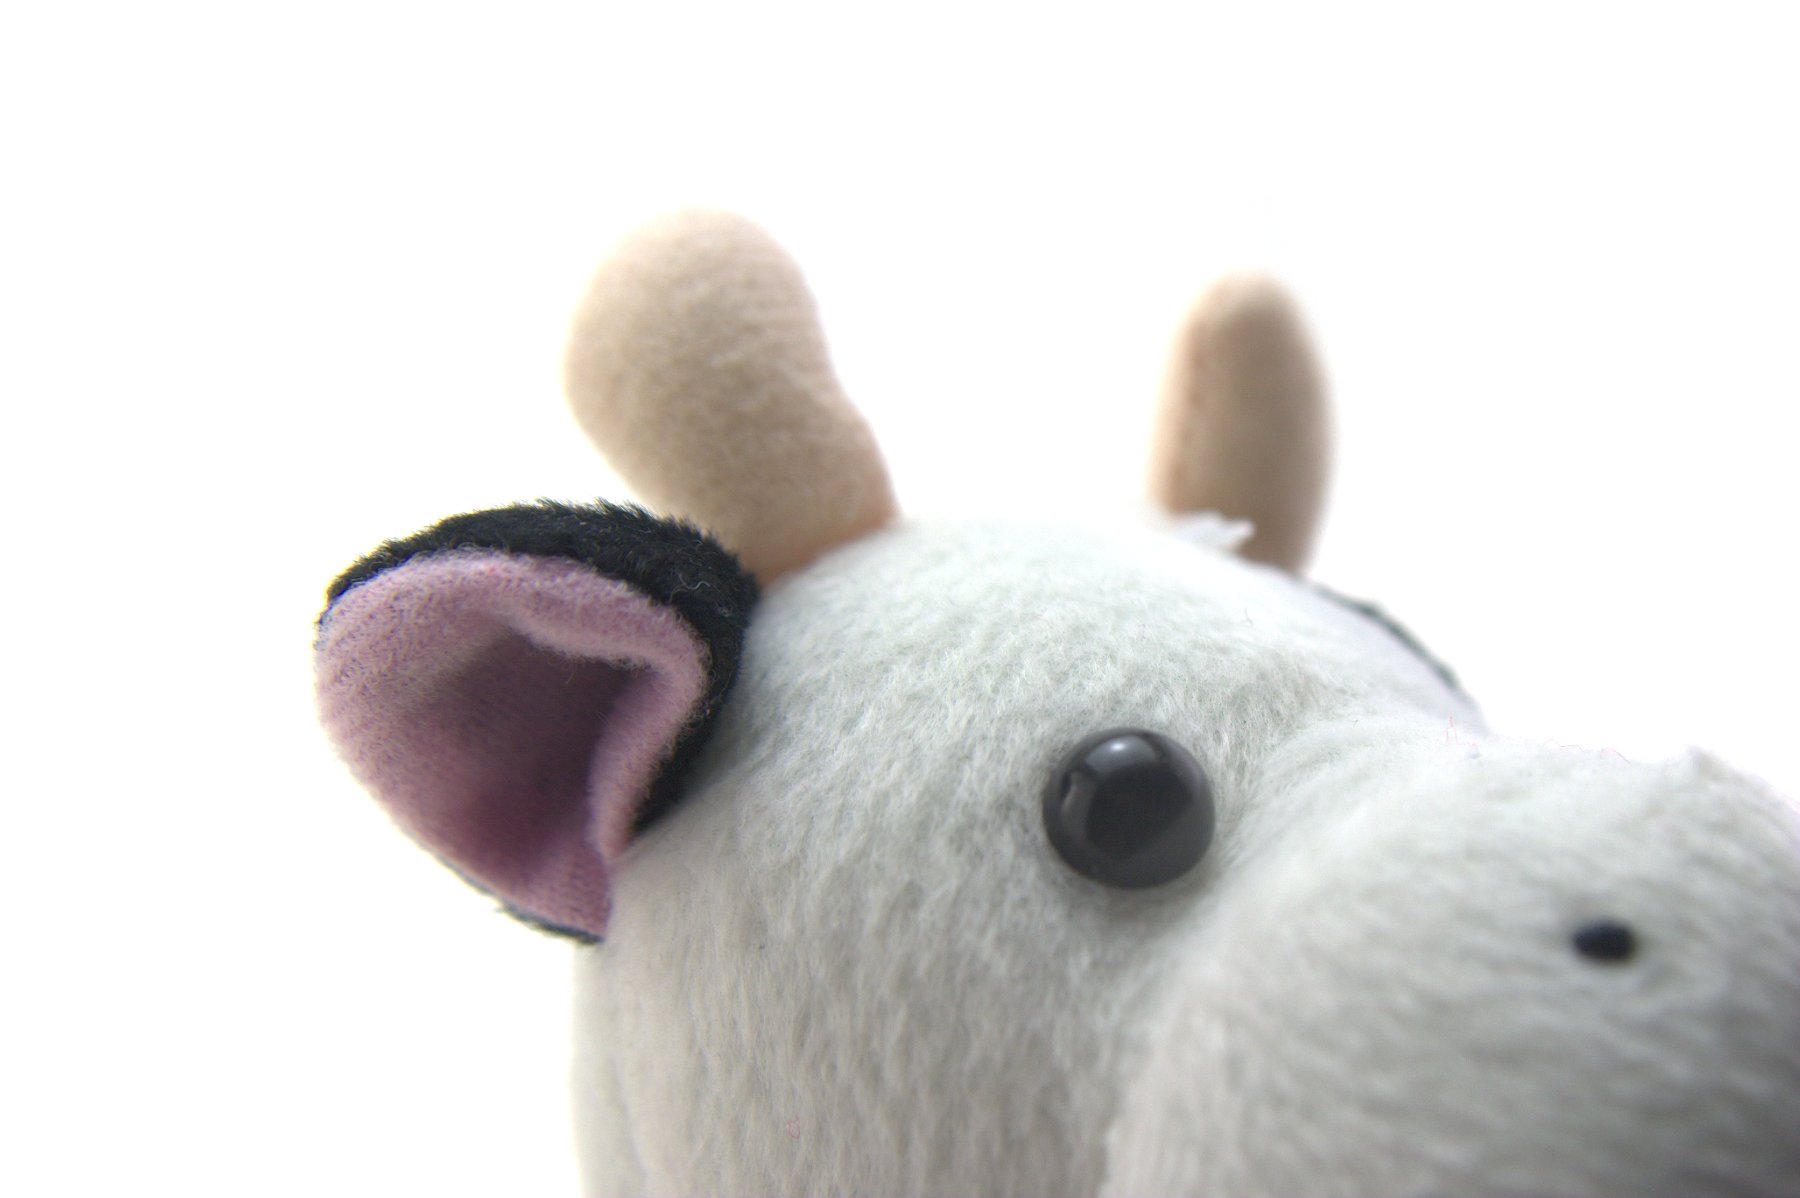 Funny cow toy photo